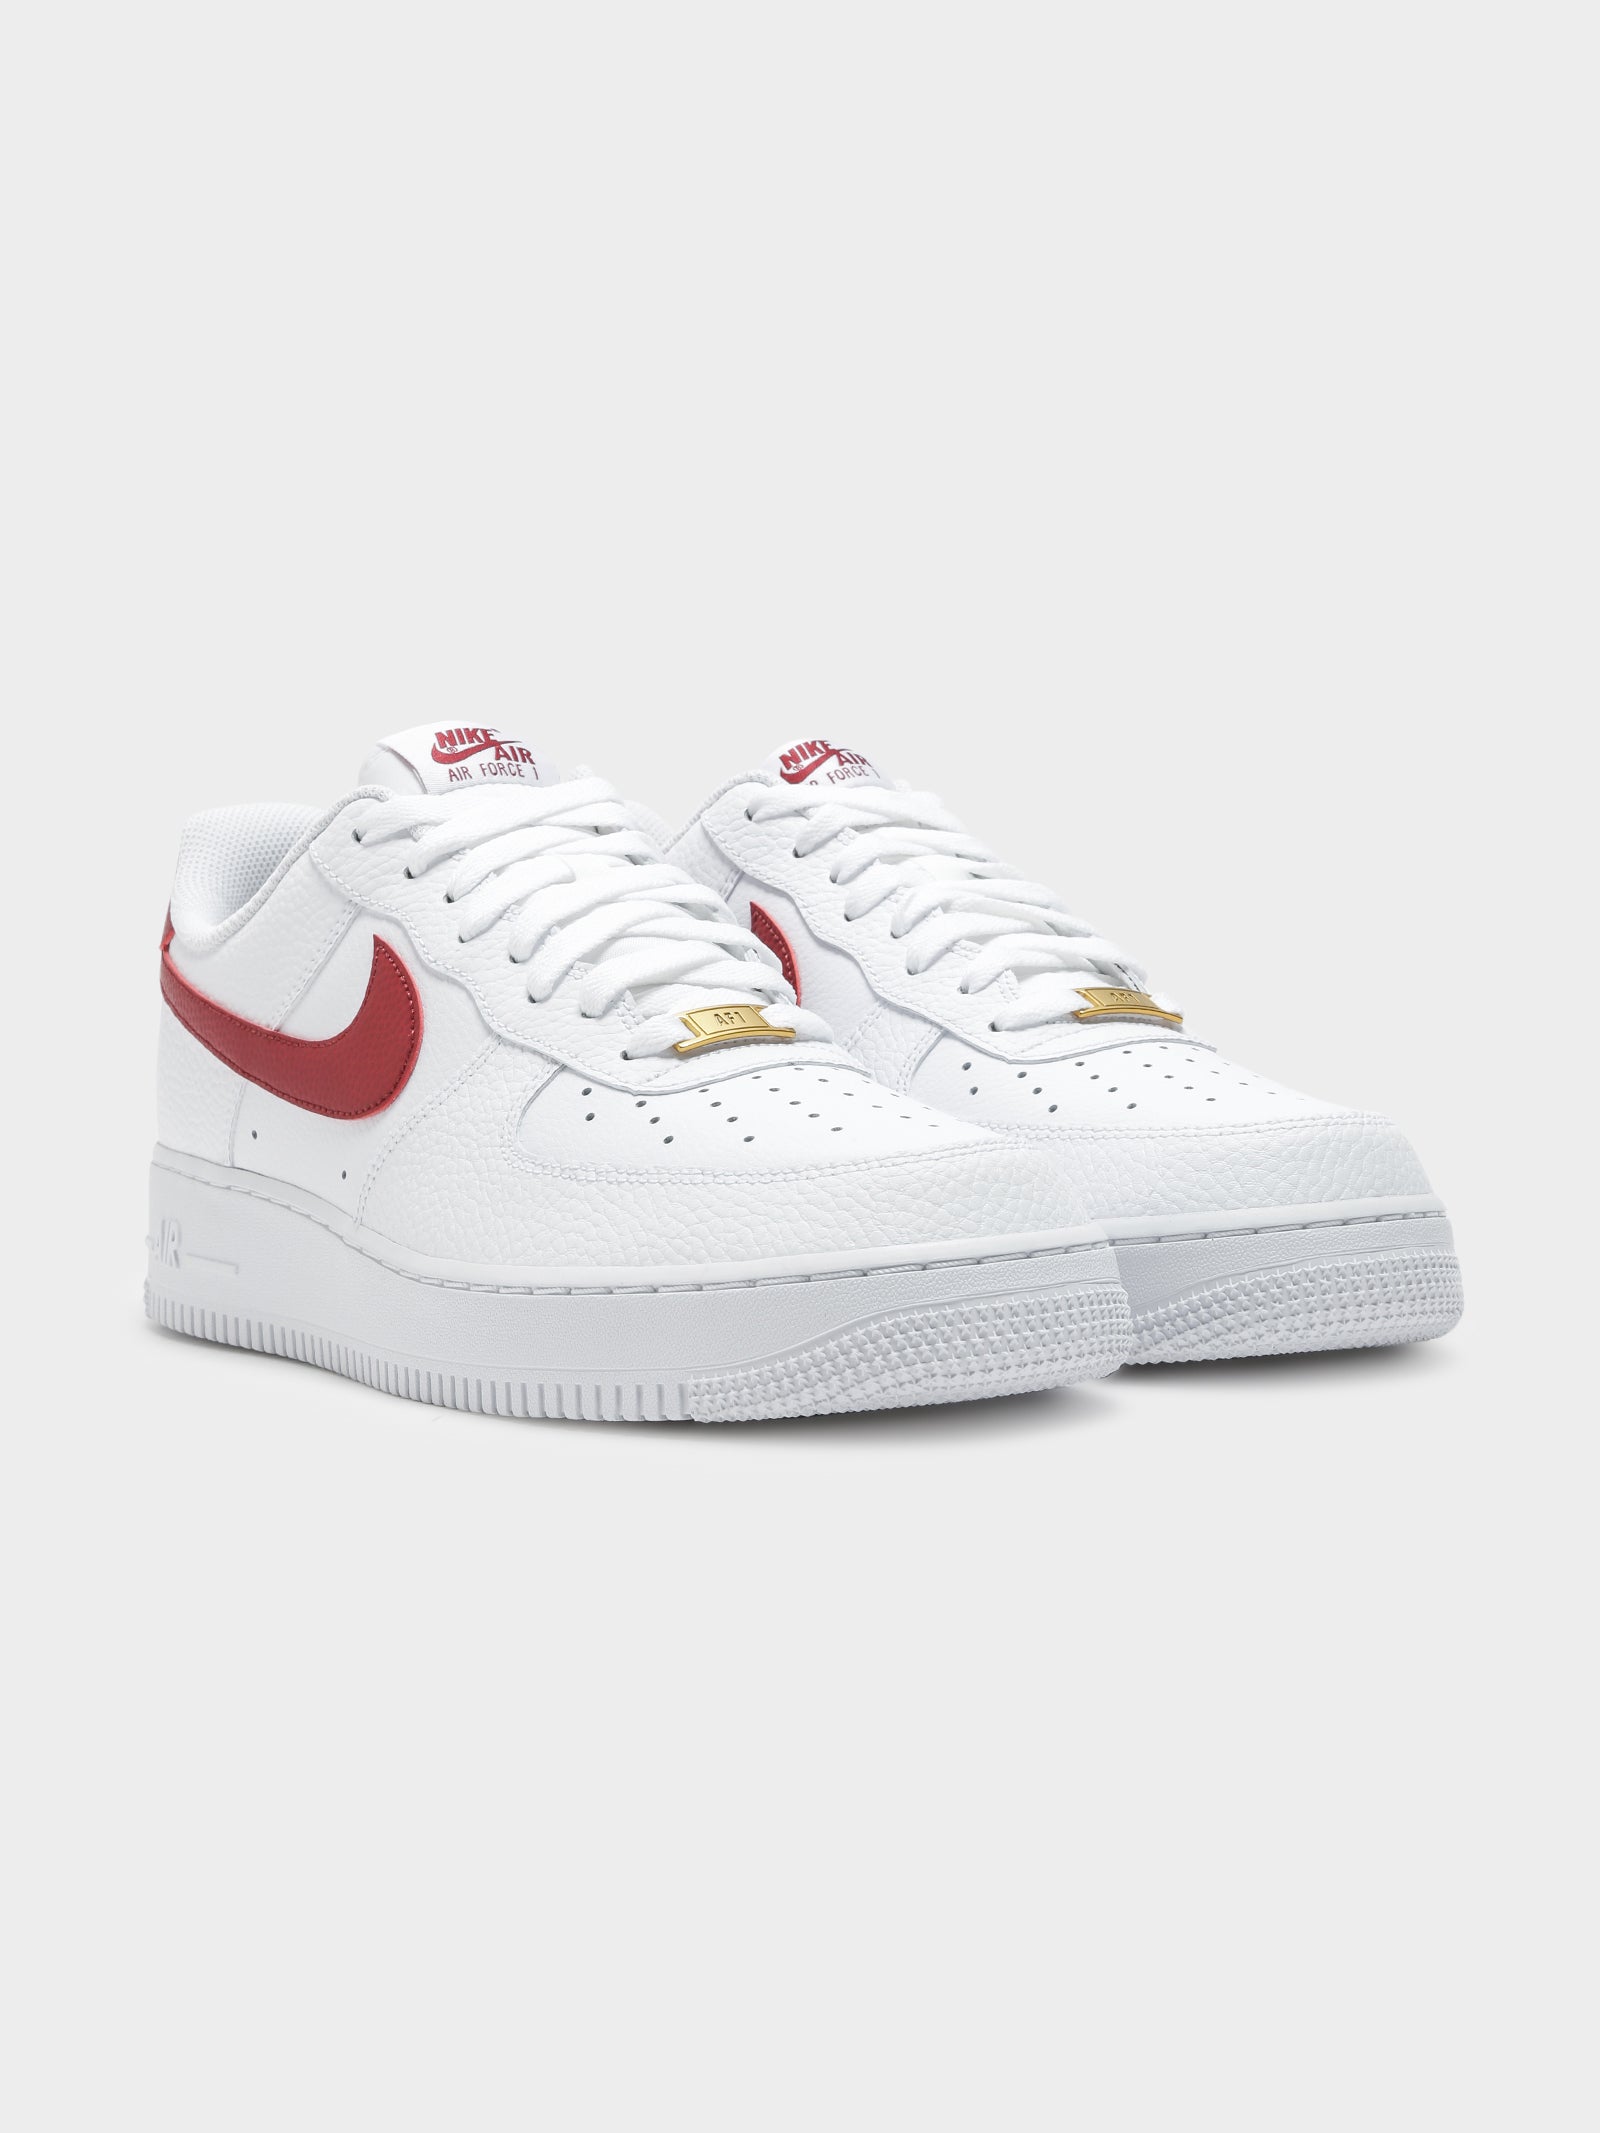 Mens Air Force 1 '07 Sneakers in White & Team Red - Glue Store